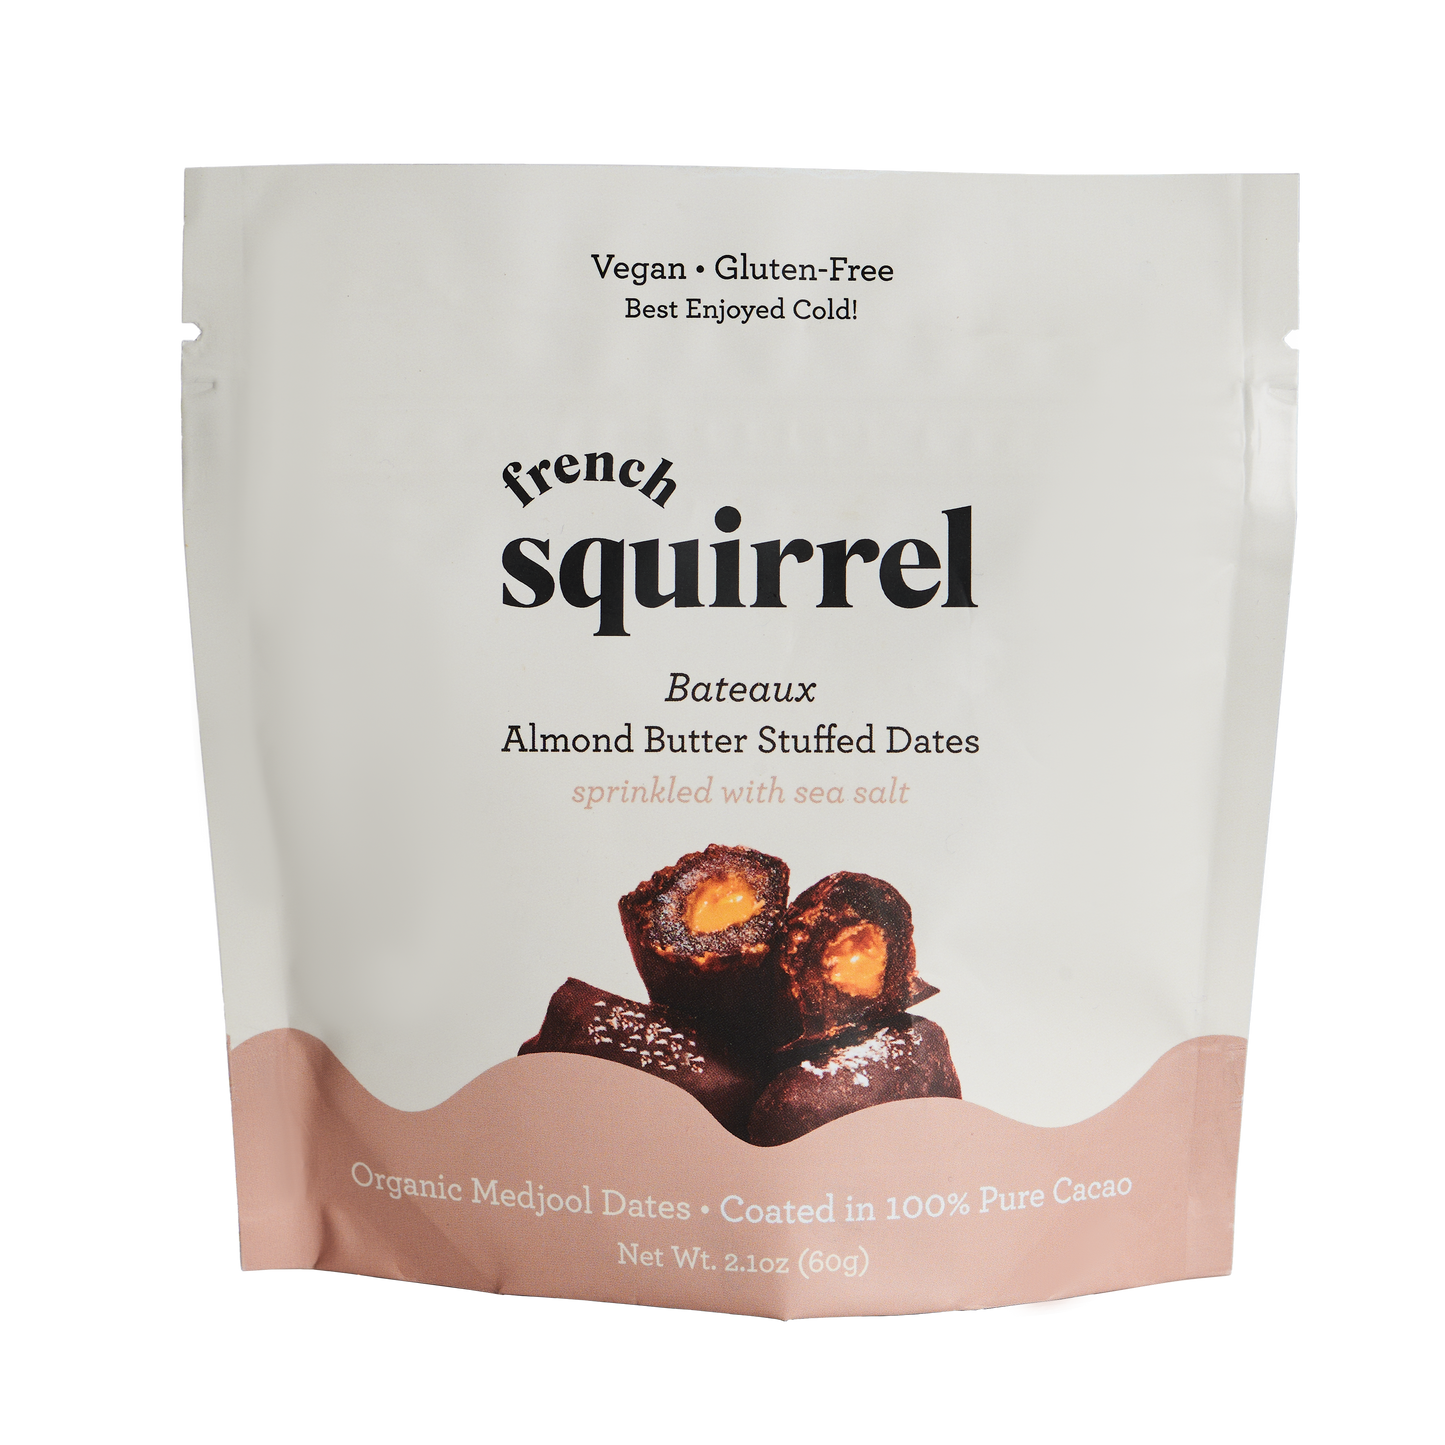 French Squirrel Almond Butter Bateaux au Chocolat Chocolate Stuffed Dates